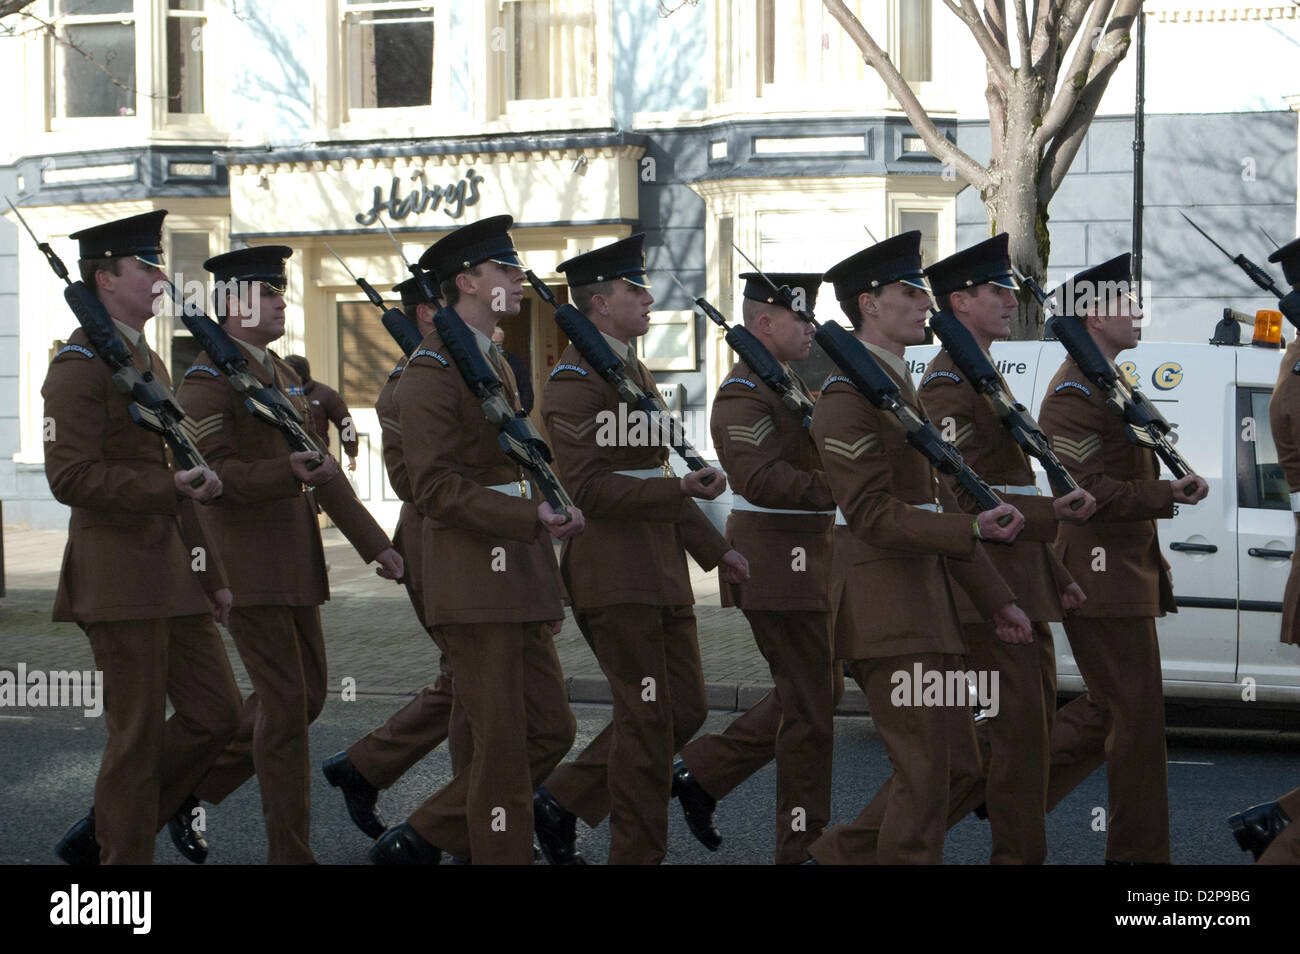 Aberystwyth, UK. 30th Jan, 2013. Soldiers from Prince of Wales' Company, 1st Battalion Welsh Guards, parade through Aberystwyth. Credit: Barry Watkins/Alamy Live News Stock Photo